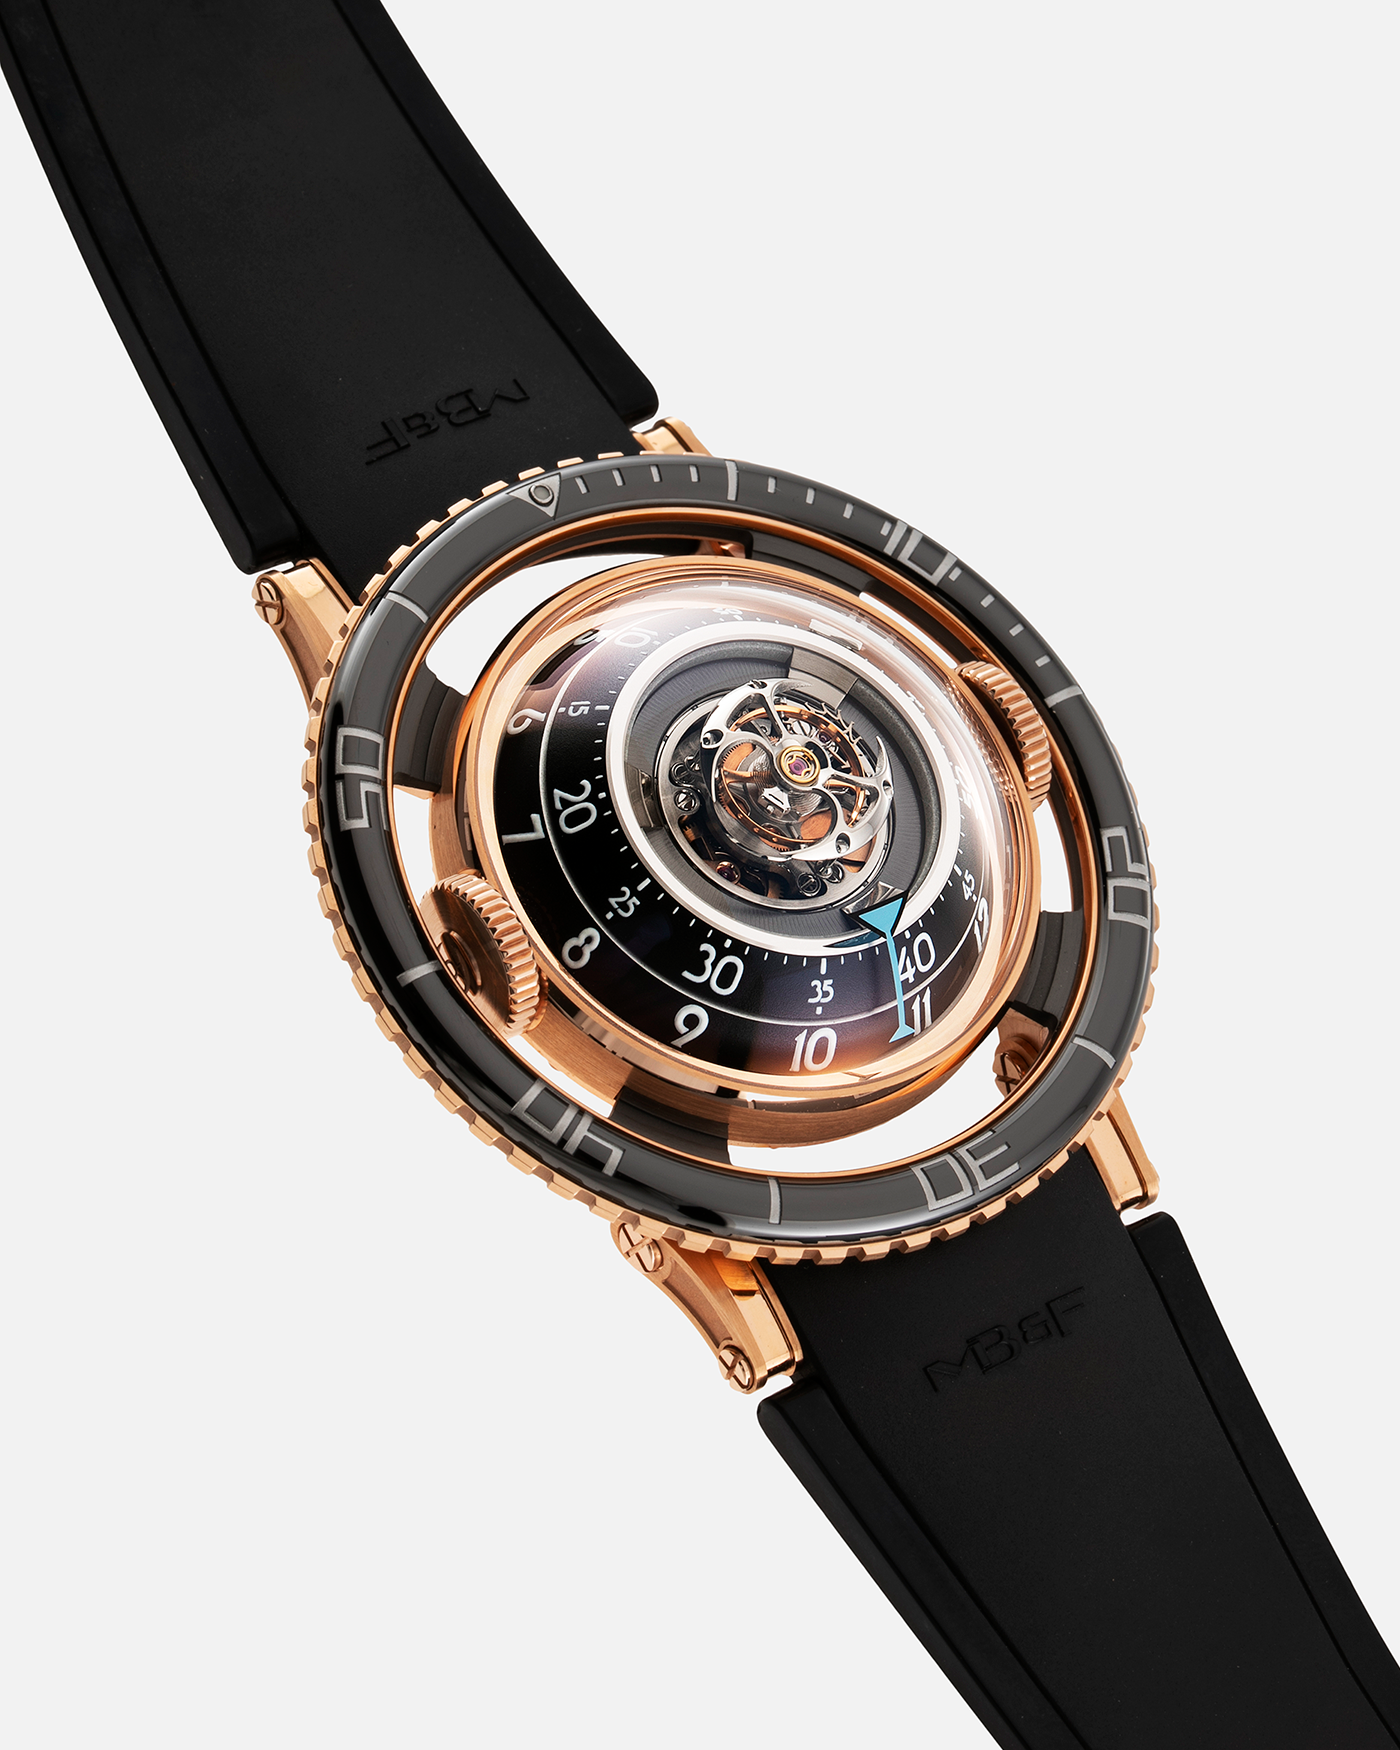 Brand: MB&F Year: 2022 Model: HM7 Aquapod Material: 18k Rose Gold Movement: In-House 3D Vertical Architecture MB&F HM7 Tourbillon Case Diameter: 53.8mm X 21.3mm With Articulating Lugs Bracelet/Strap: MB&F Black Rubber Strap with 18k Rose Gold Deployant Clasp